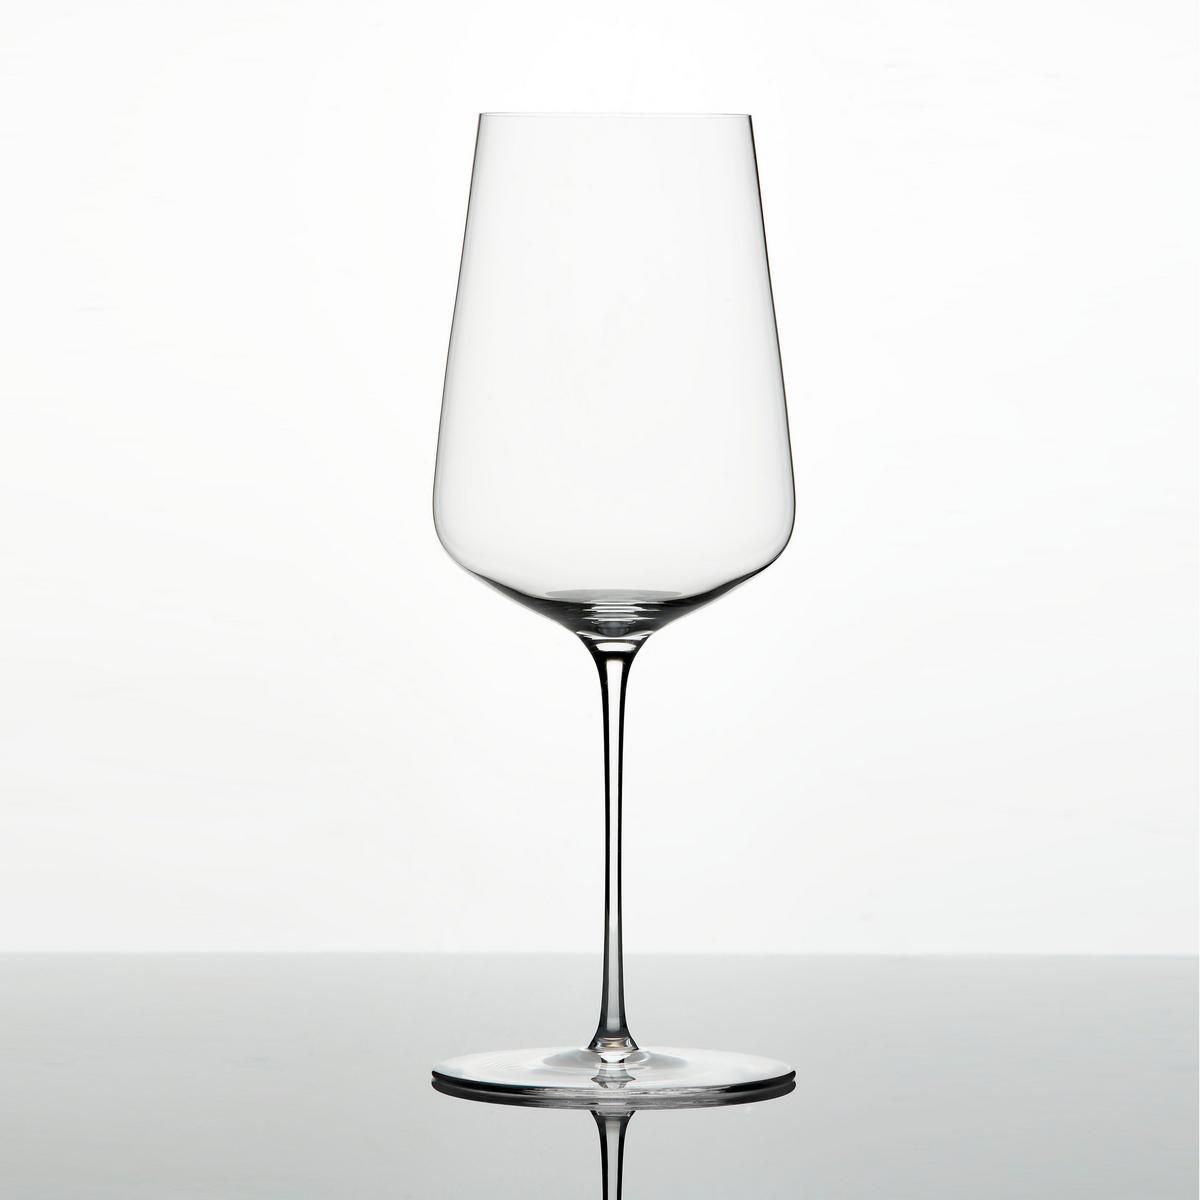 We Tested 14 Universal Wine Glasses—Here Are Our Favorites